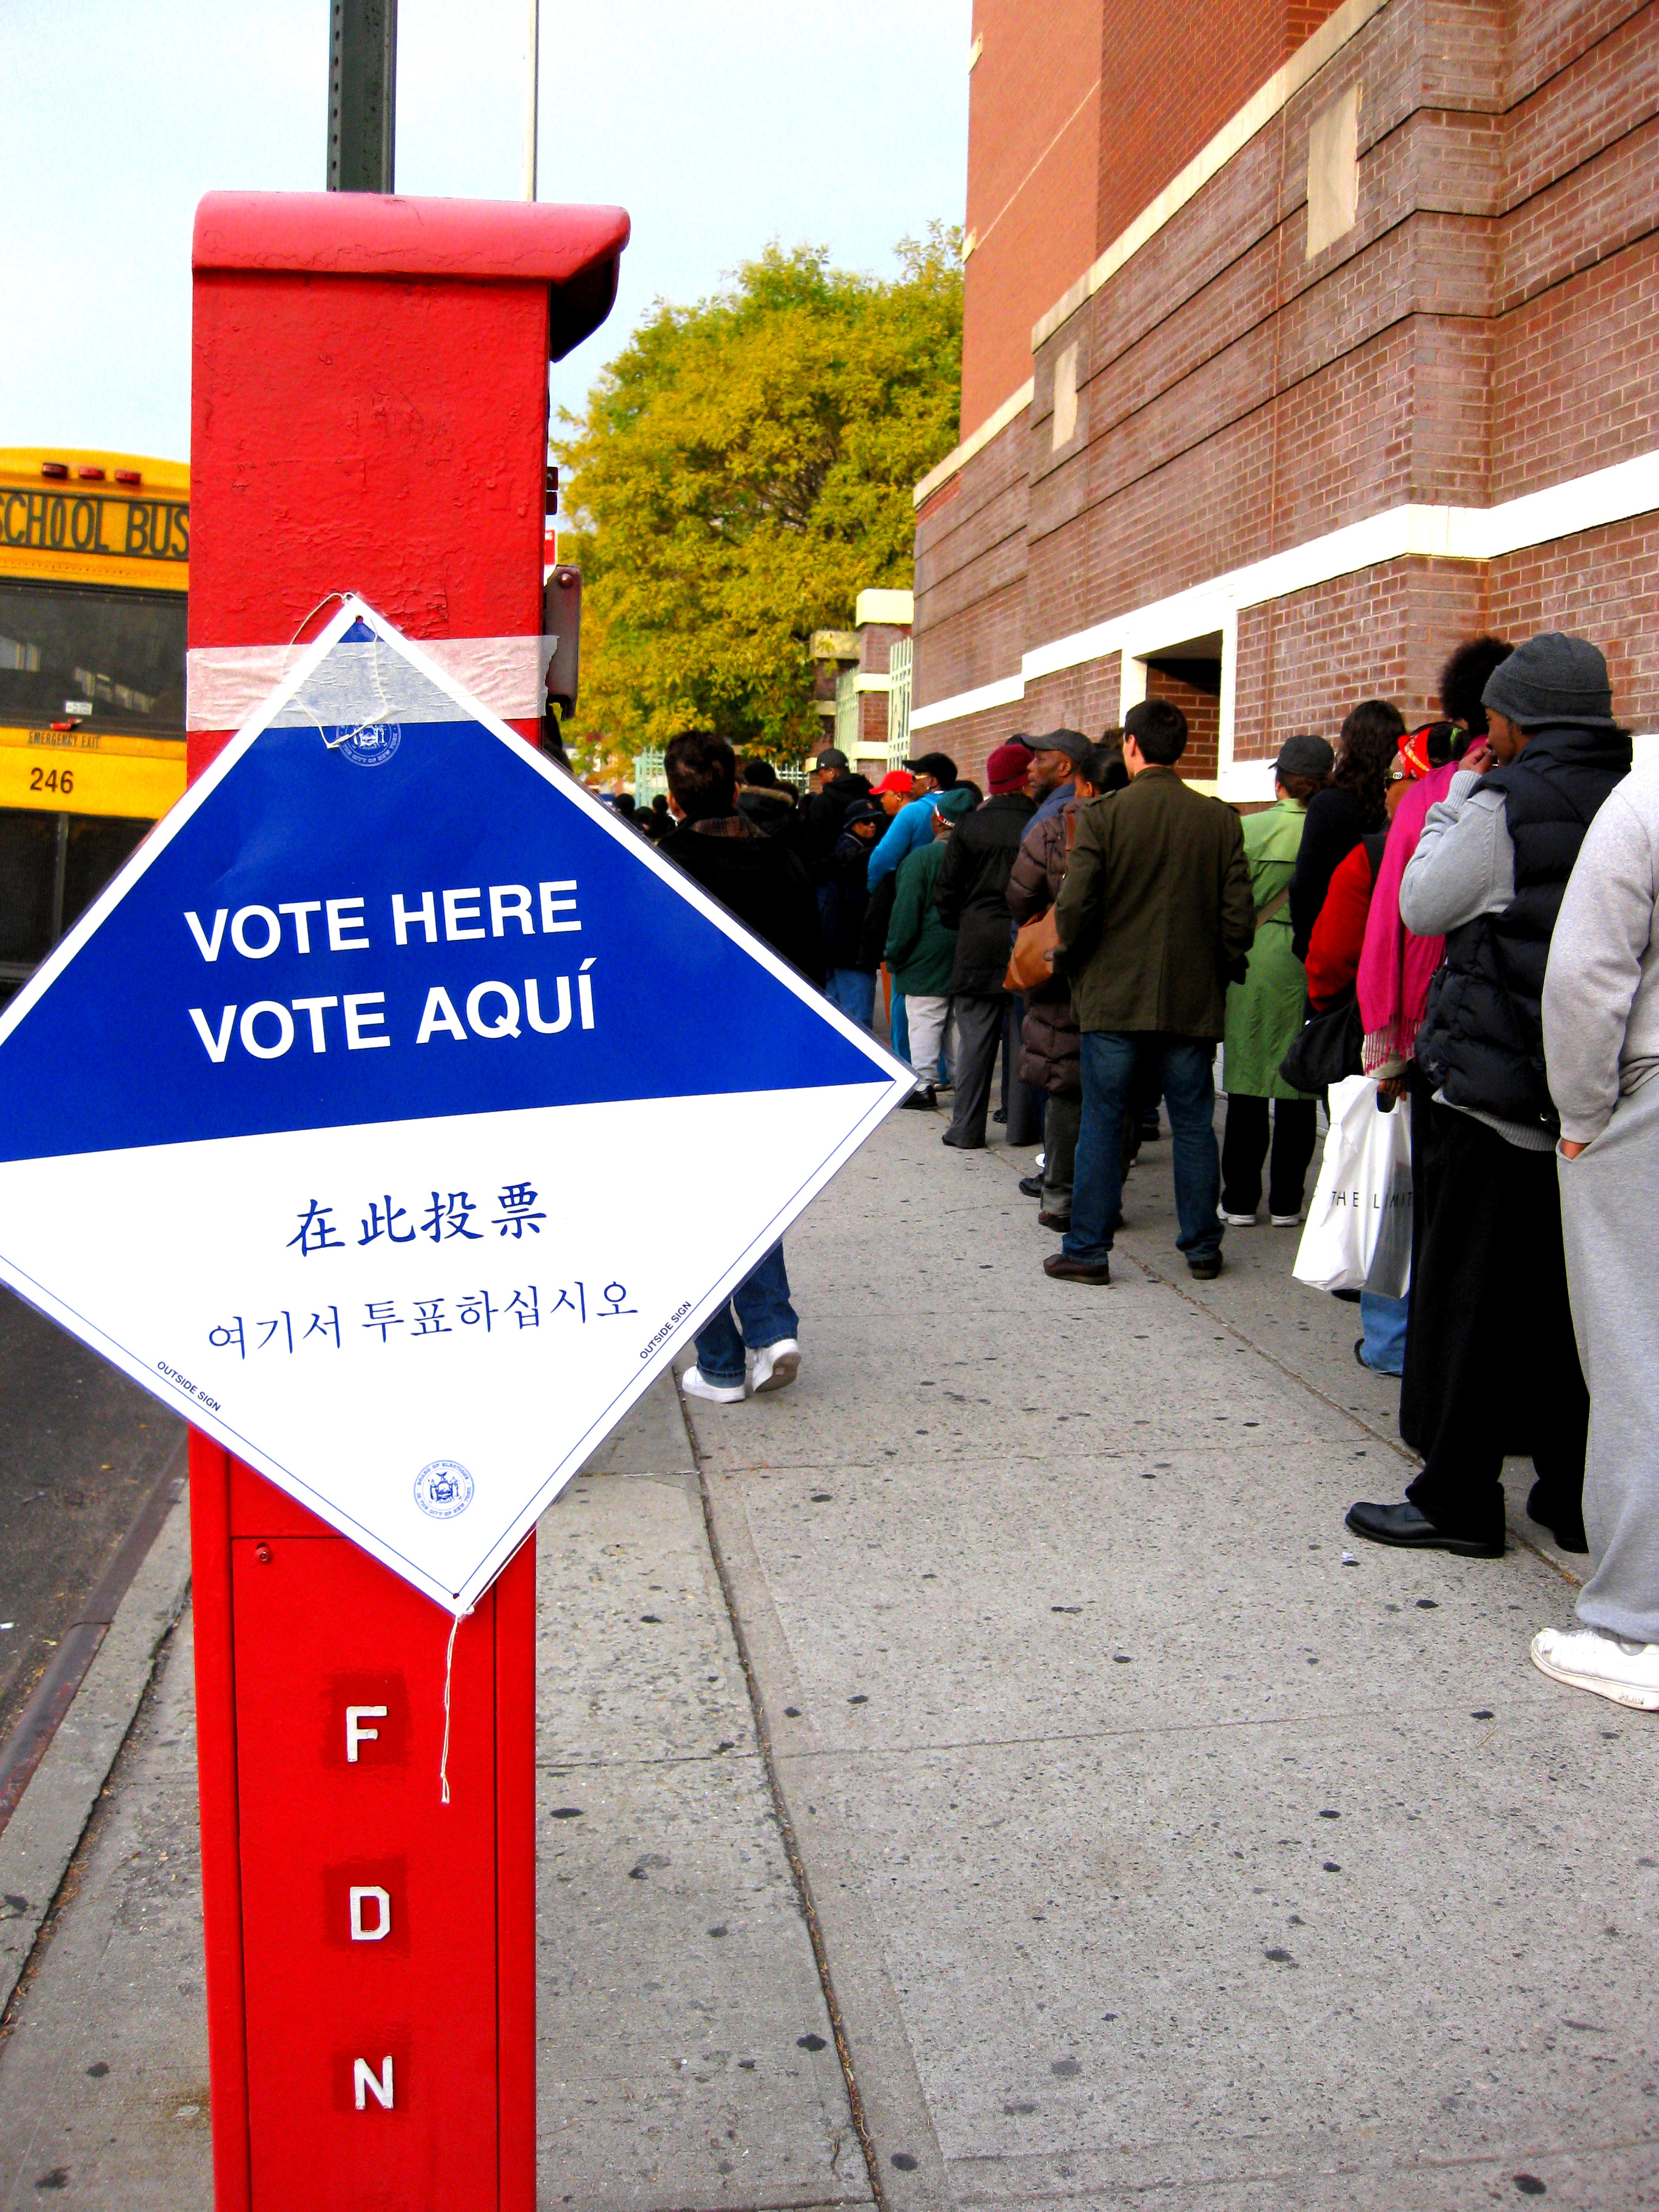 Voters in long lines. Photo courtesy of Wikimedia Comments. 